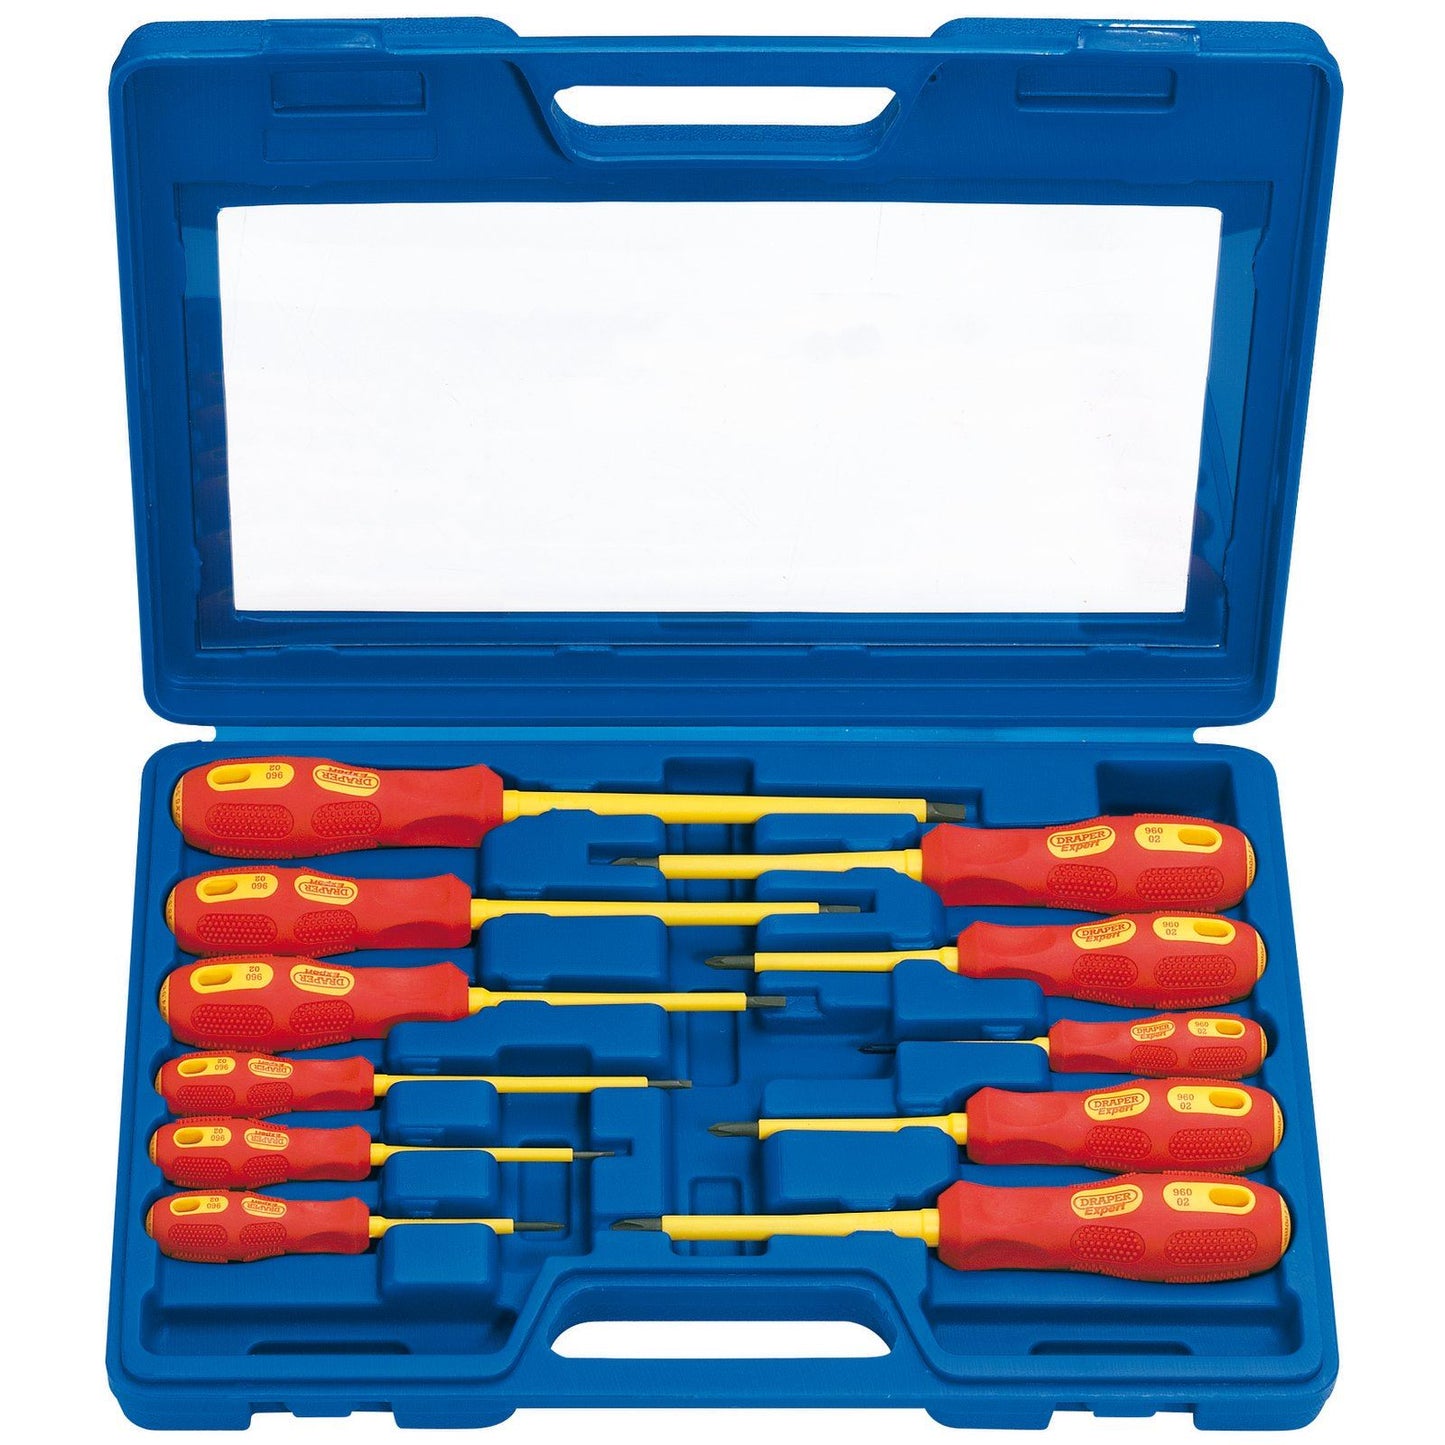 Draper Expert Electricians Screwdriver Set VDE Fully Insulated Quality New 11 Pc - 69234